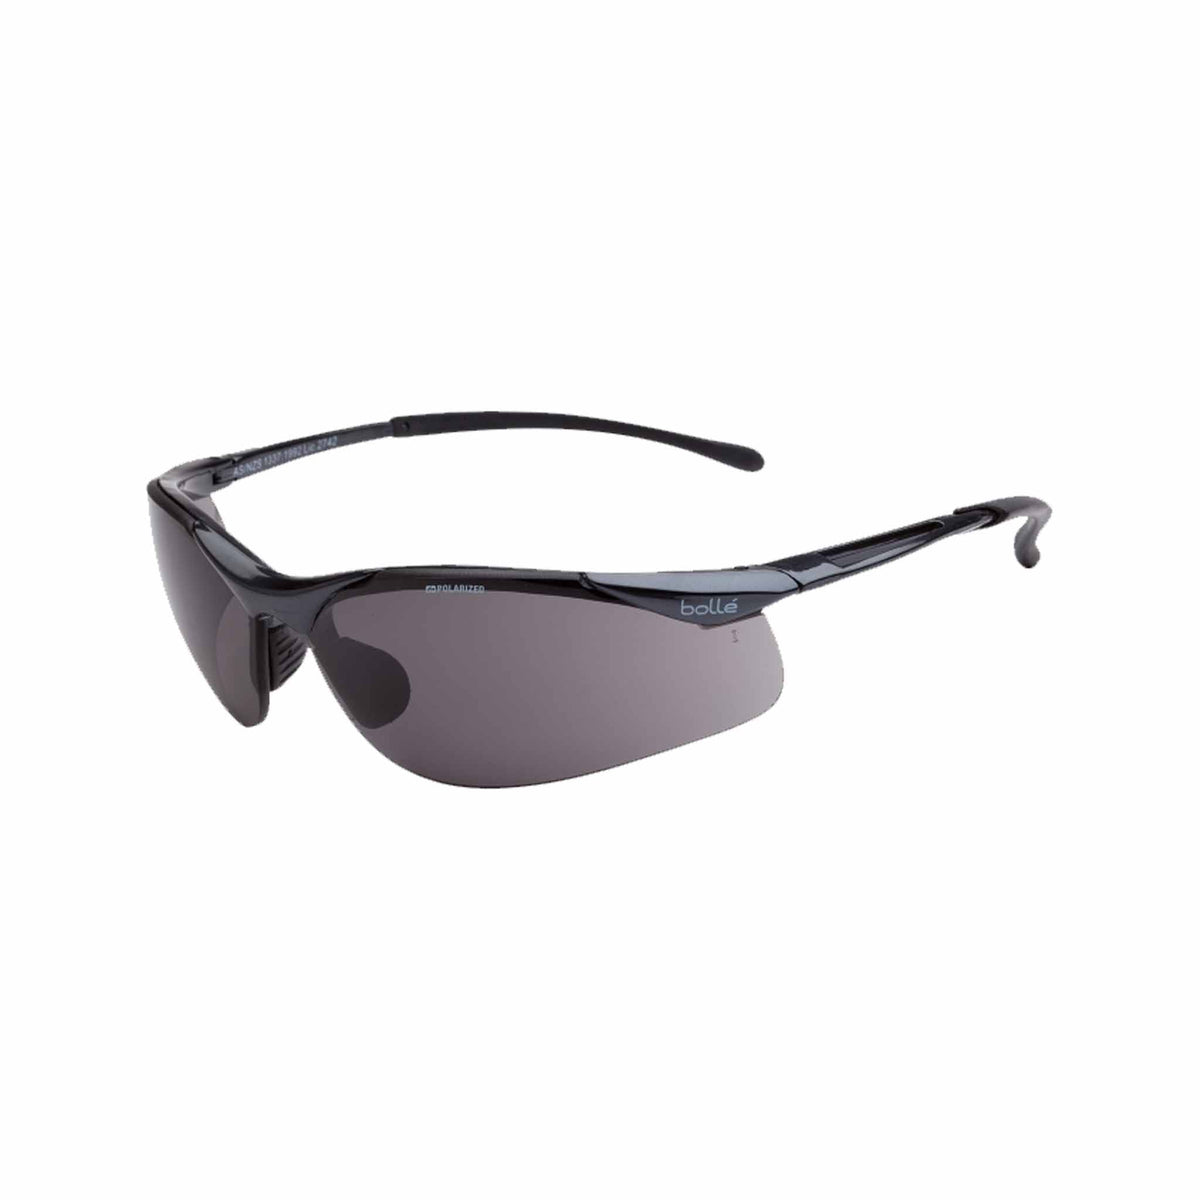 bolle contour (sidewinder) glasses with polarised grey lenses